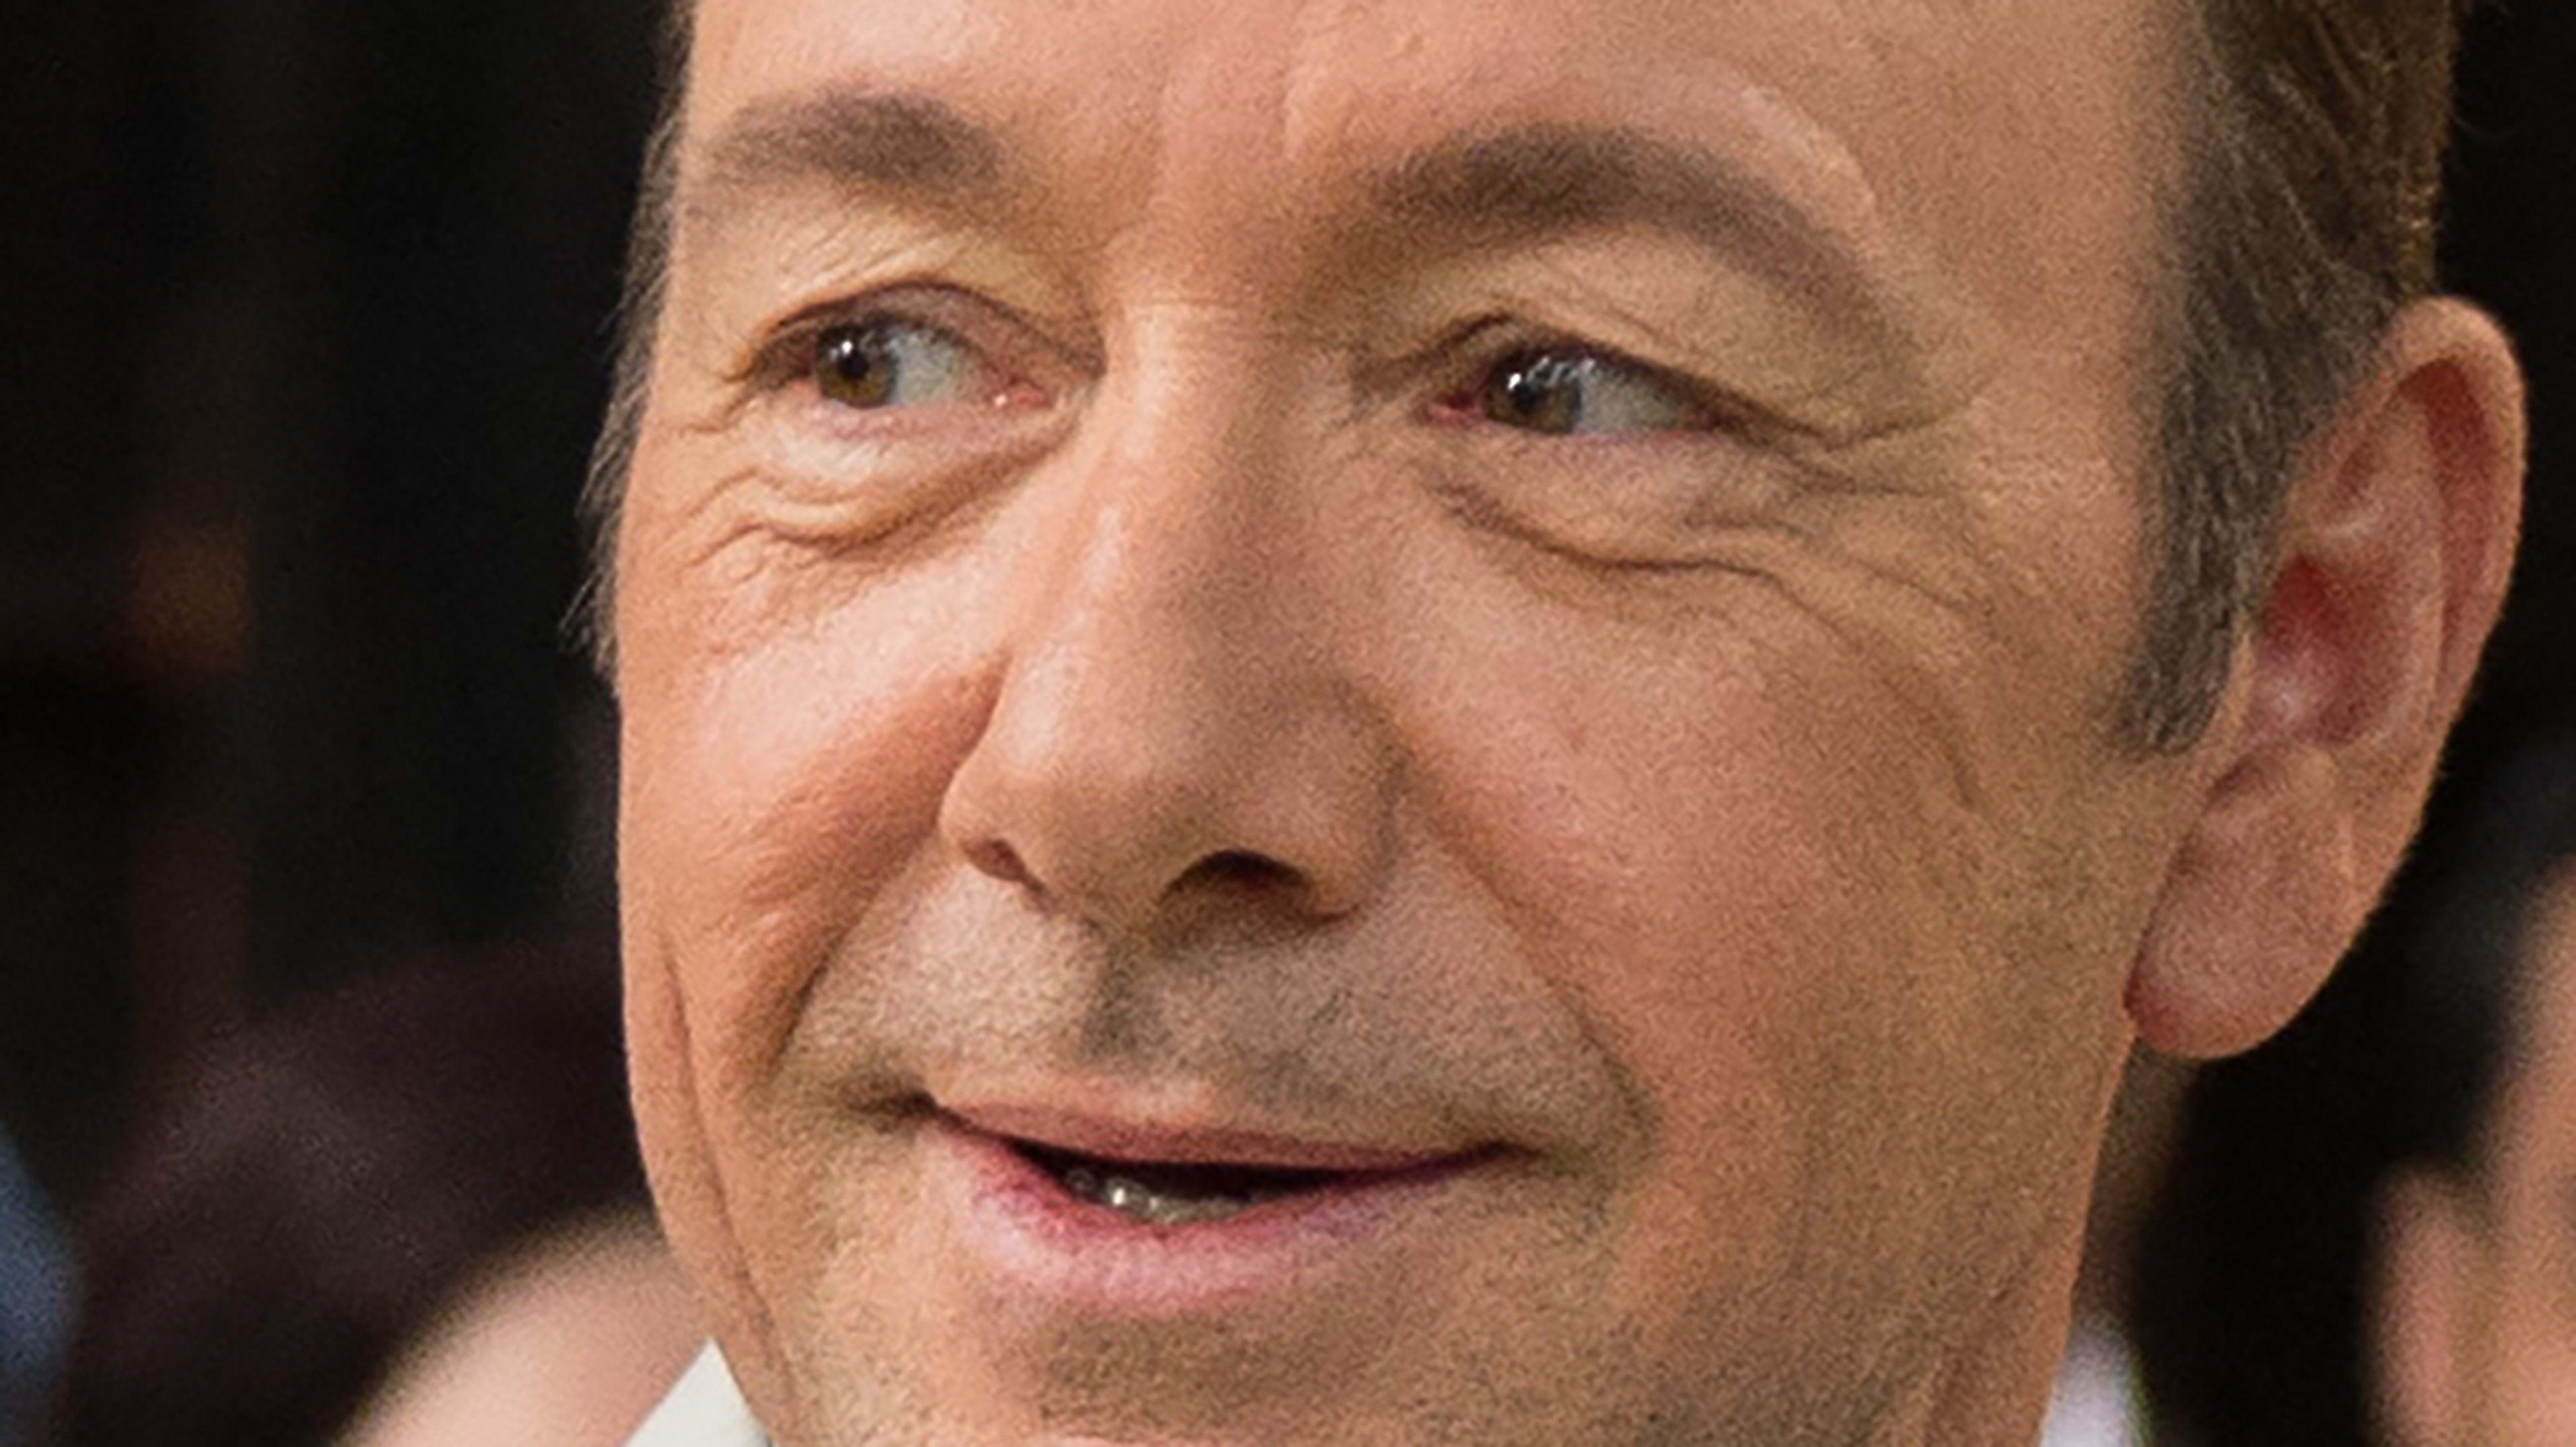 Kevin Spacey’s weird Frank Underwood video is going over about as well as expected